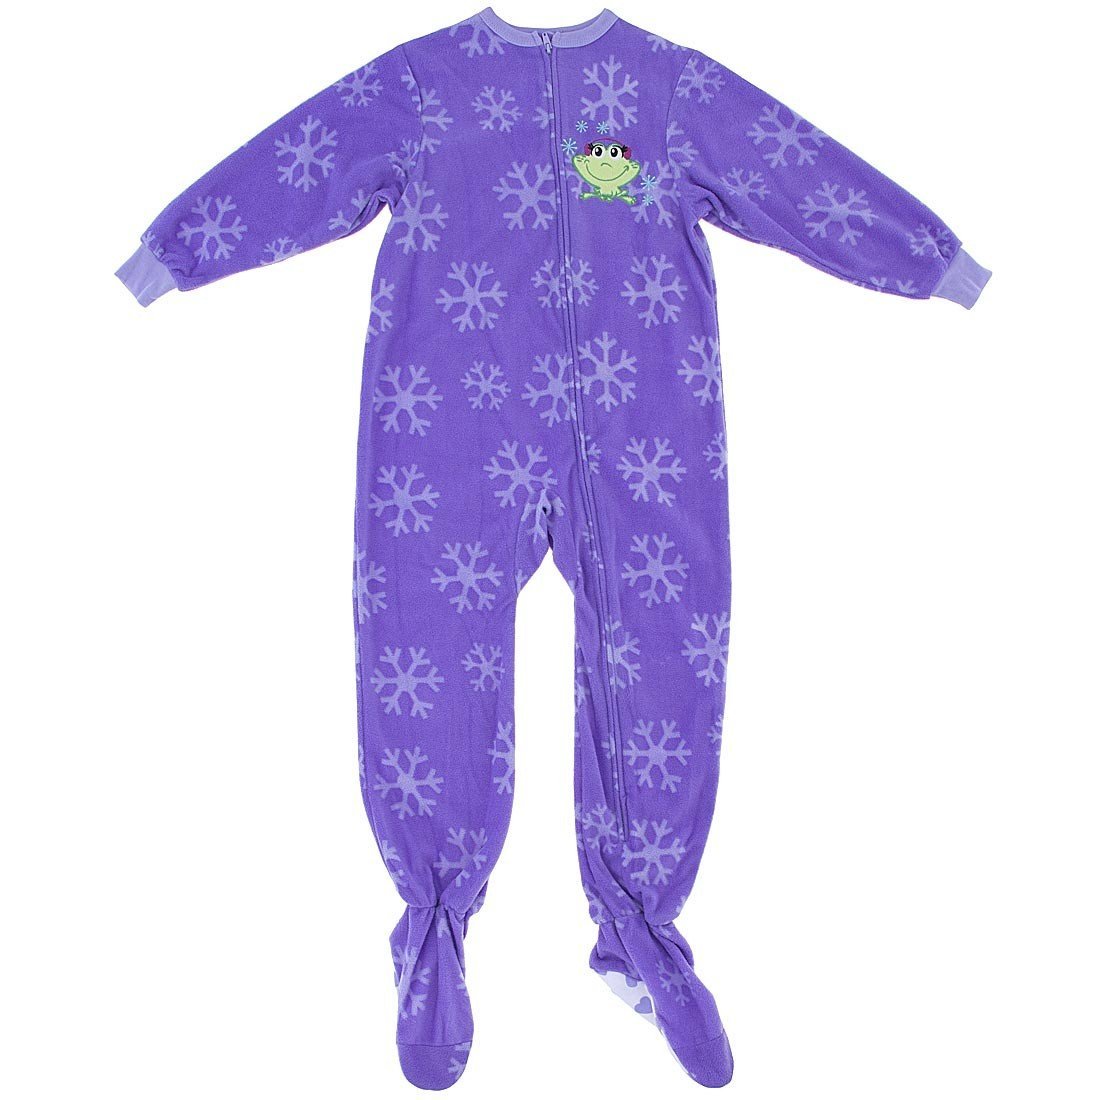 Pajama clipart footie pajamas. Picture of wikiclipart 